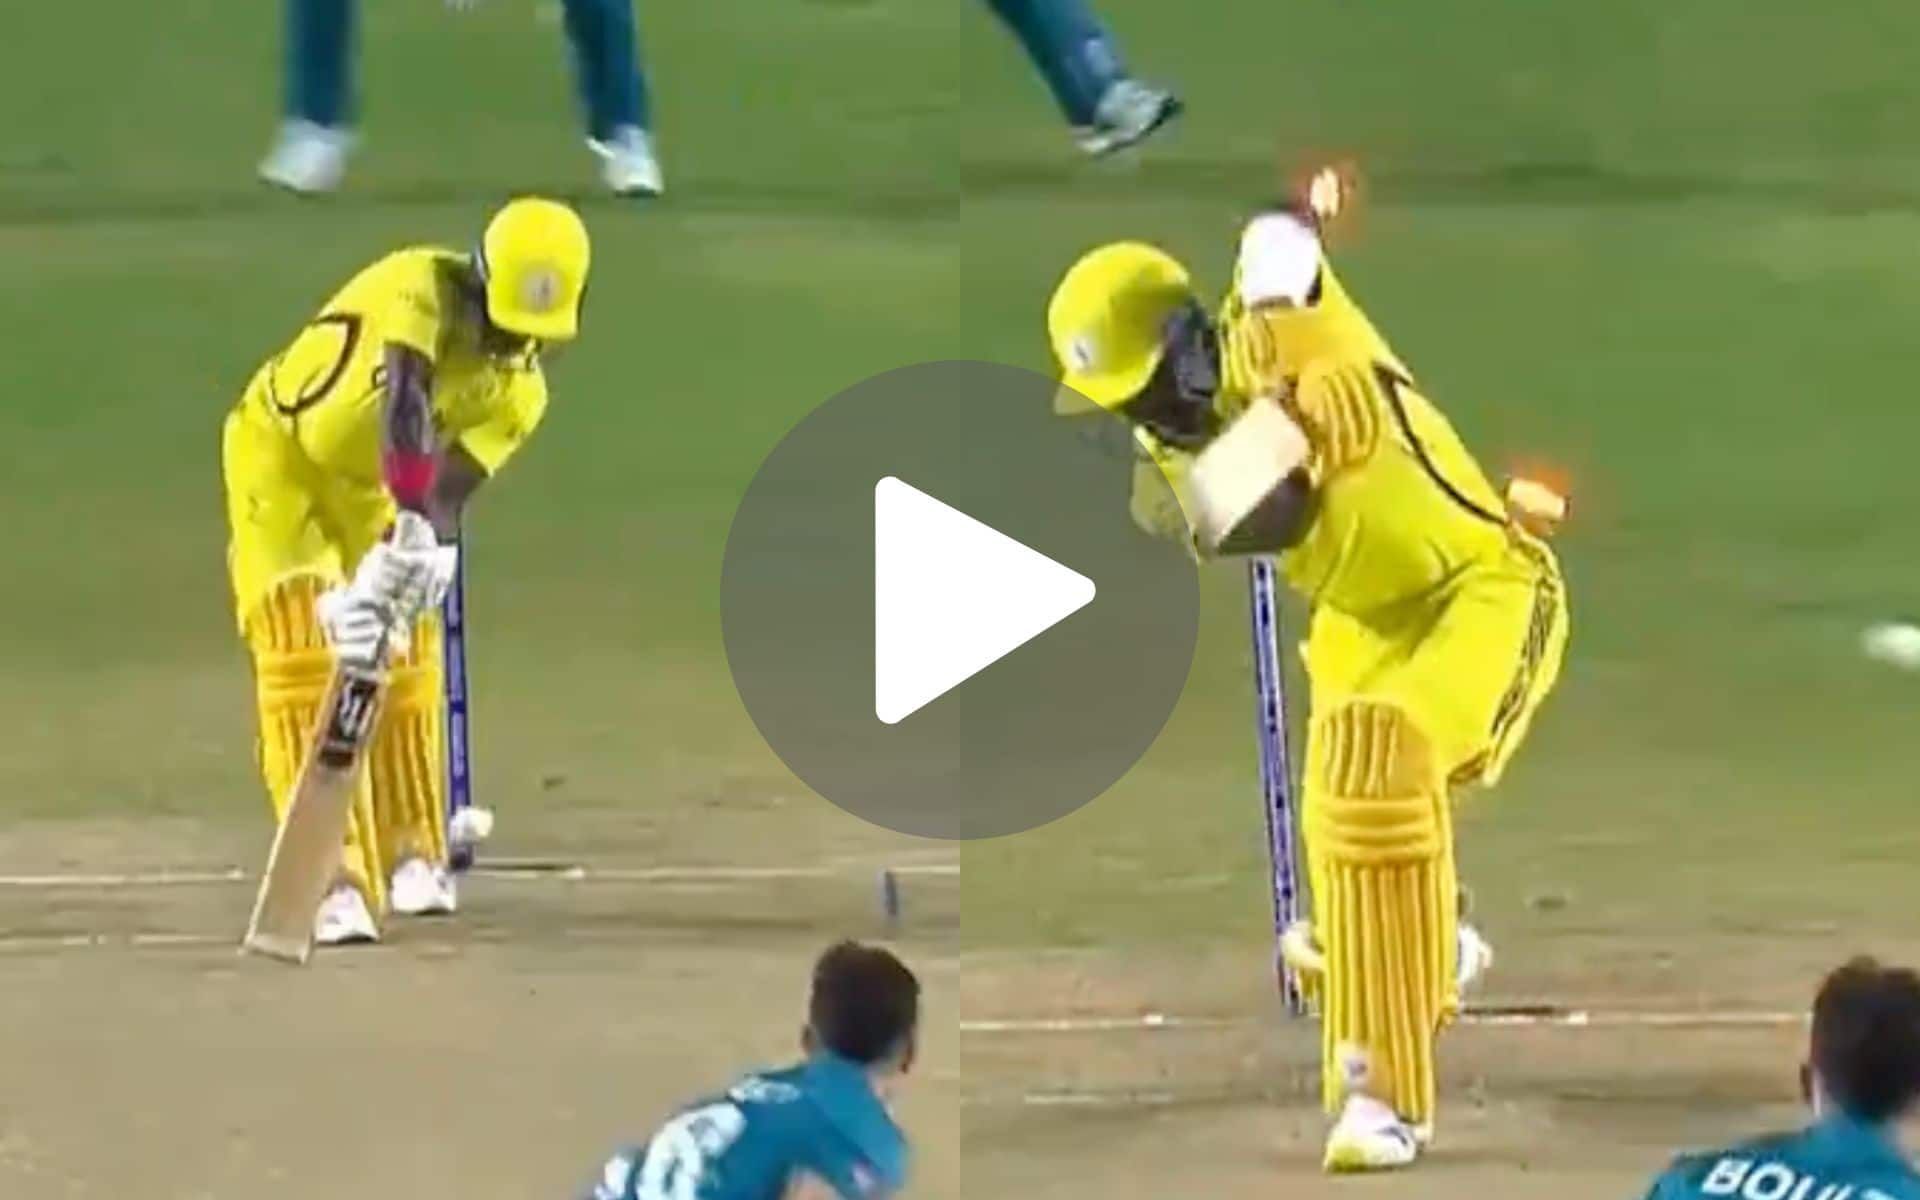 [Watch] 0,1, W, W, 0,0 - Trent Boult Bowl's A Magical First Over Against Uganda